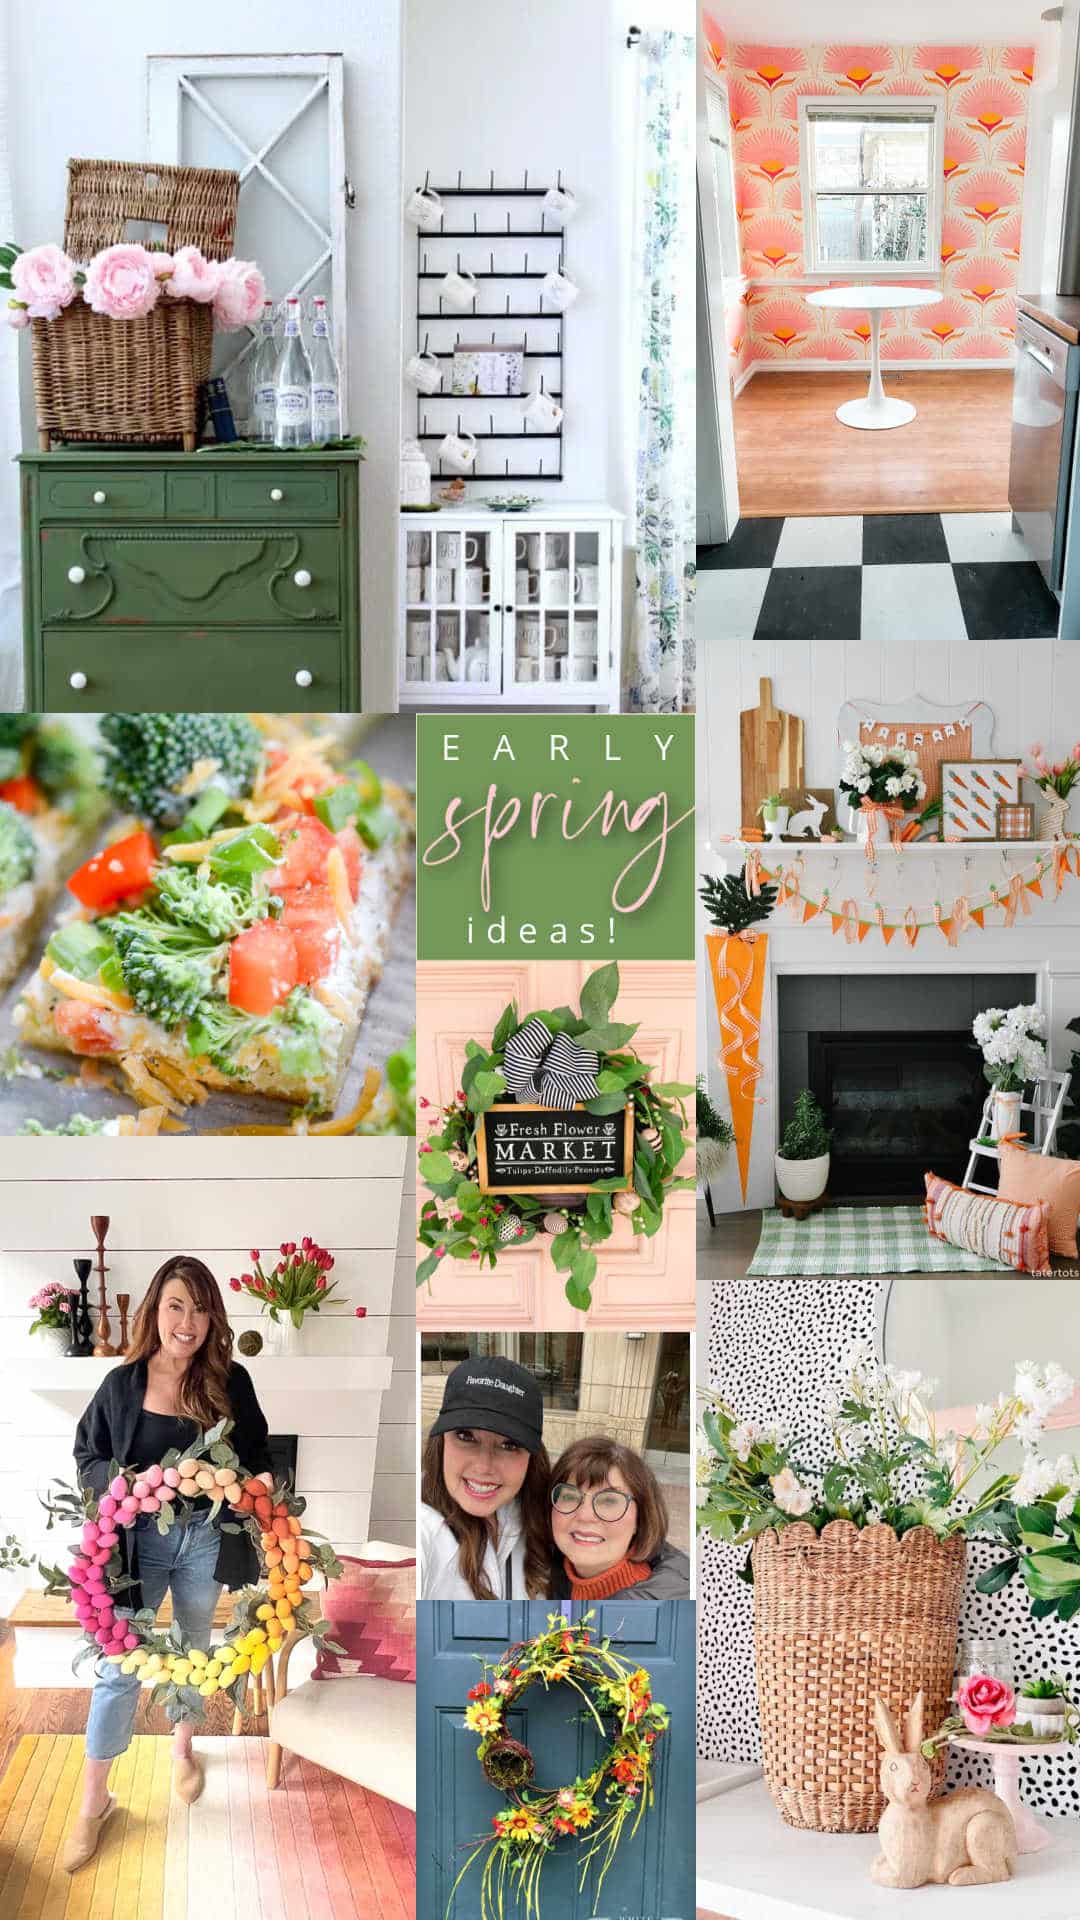 Early Spring Ideas! Get ready for warmer weather for your home with these beautiful spring ideas.